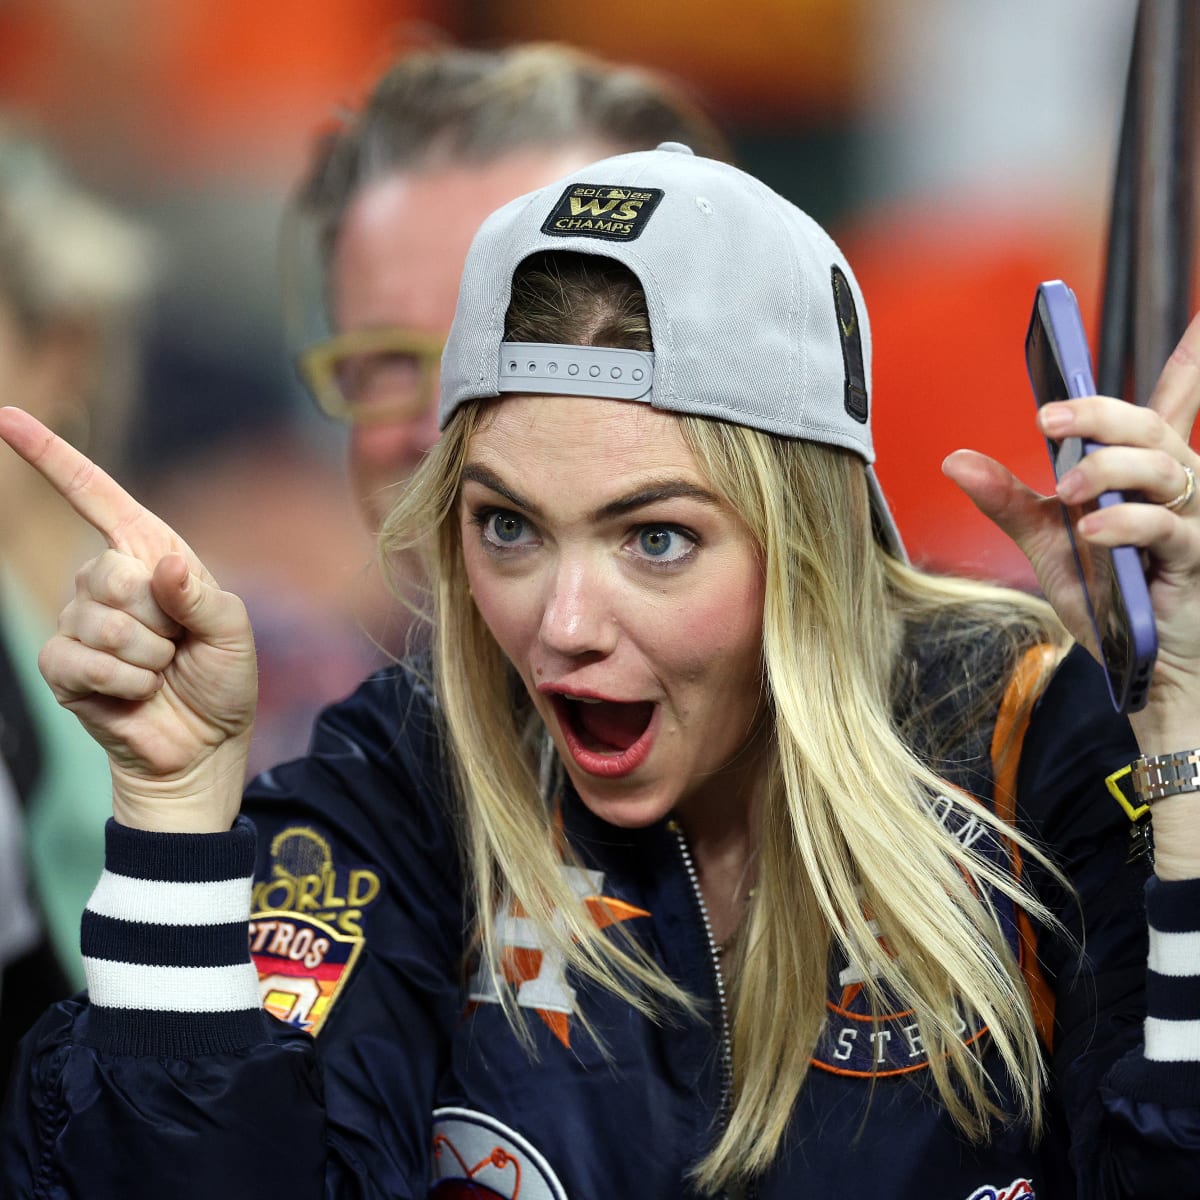 Remembering When Kate Upton Got Into It With Fan At MLB Playoff